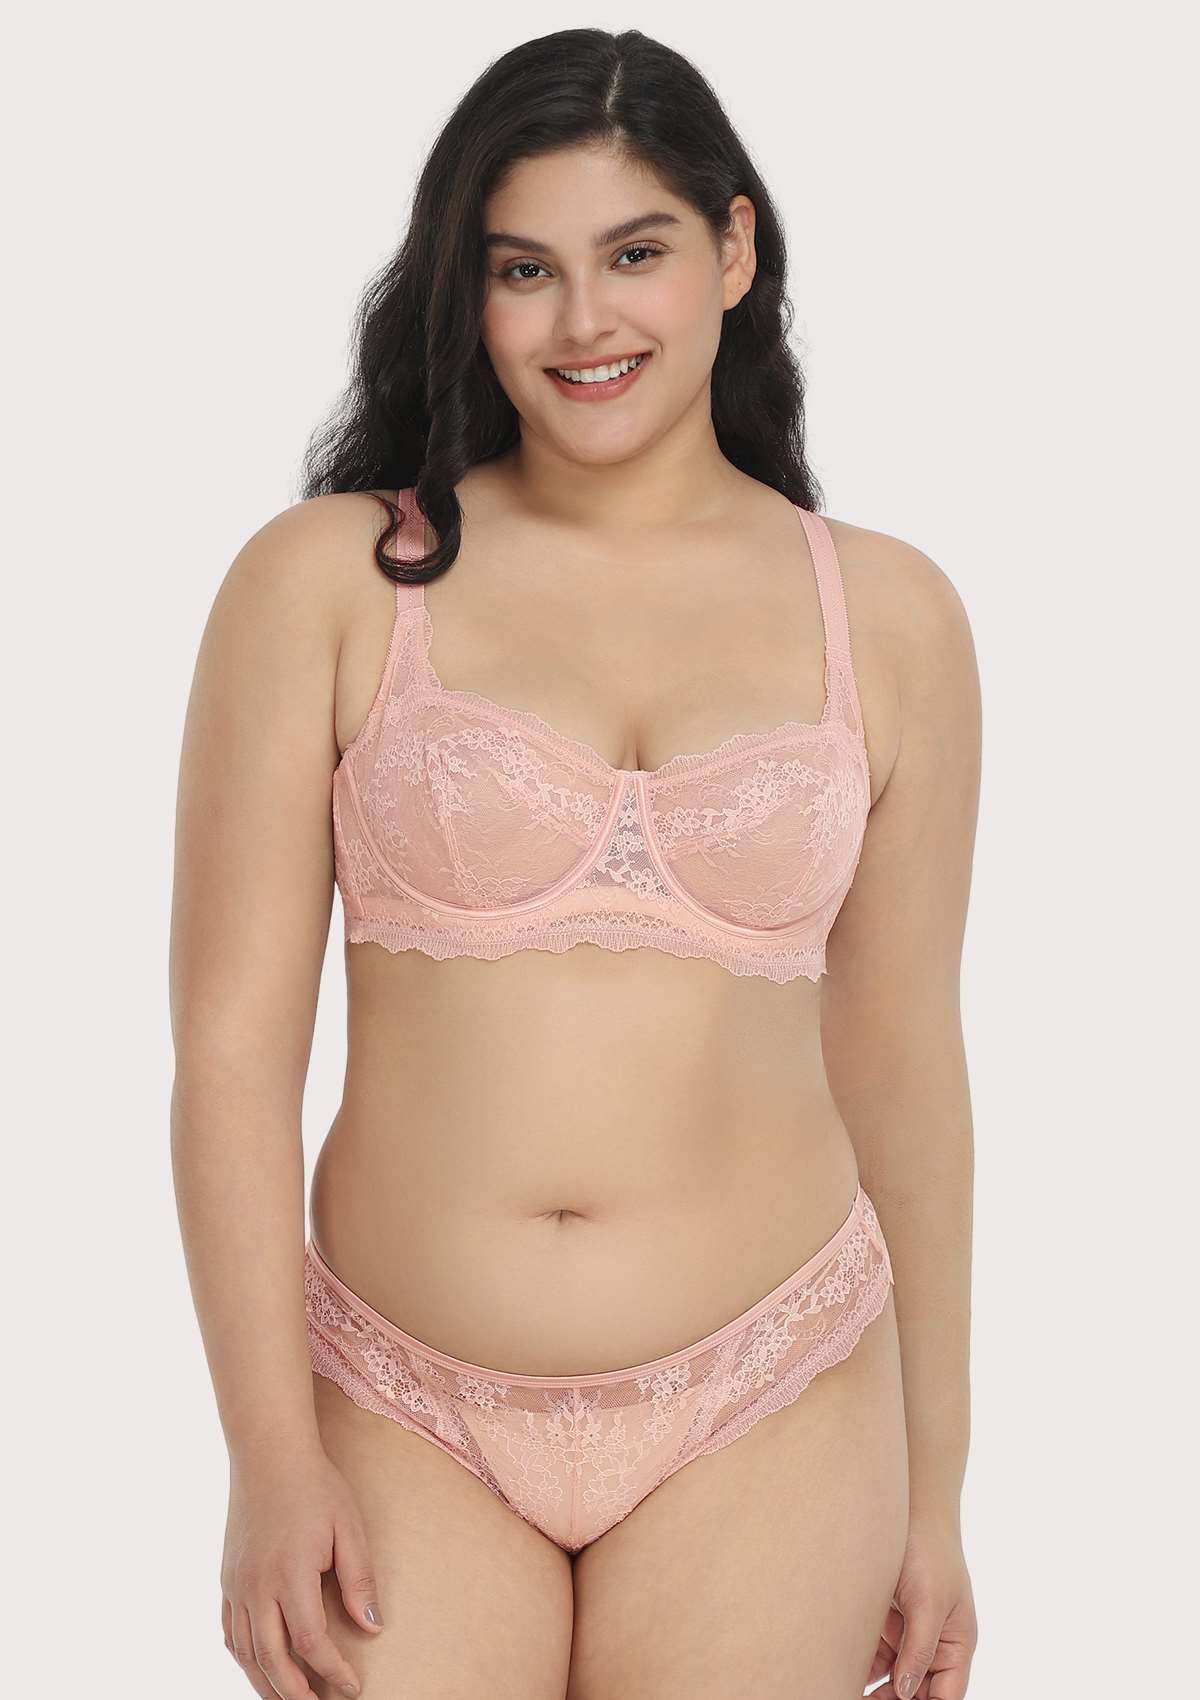 HSIA Floral Lace Unlined Bridal Balconette Delicate Bra Panty Set - Pink / 38 / DDD/F